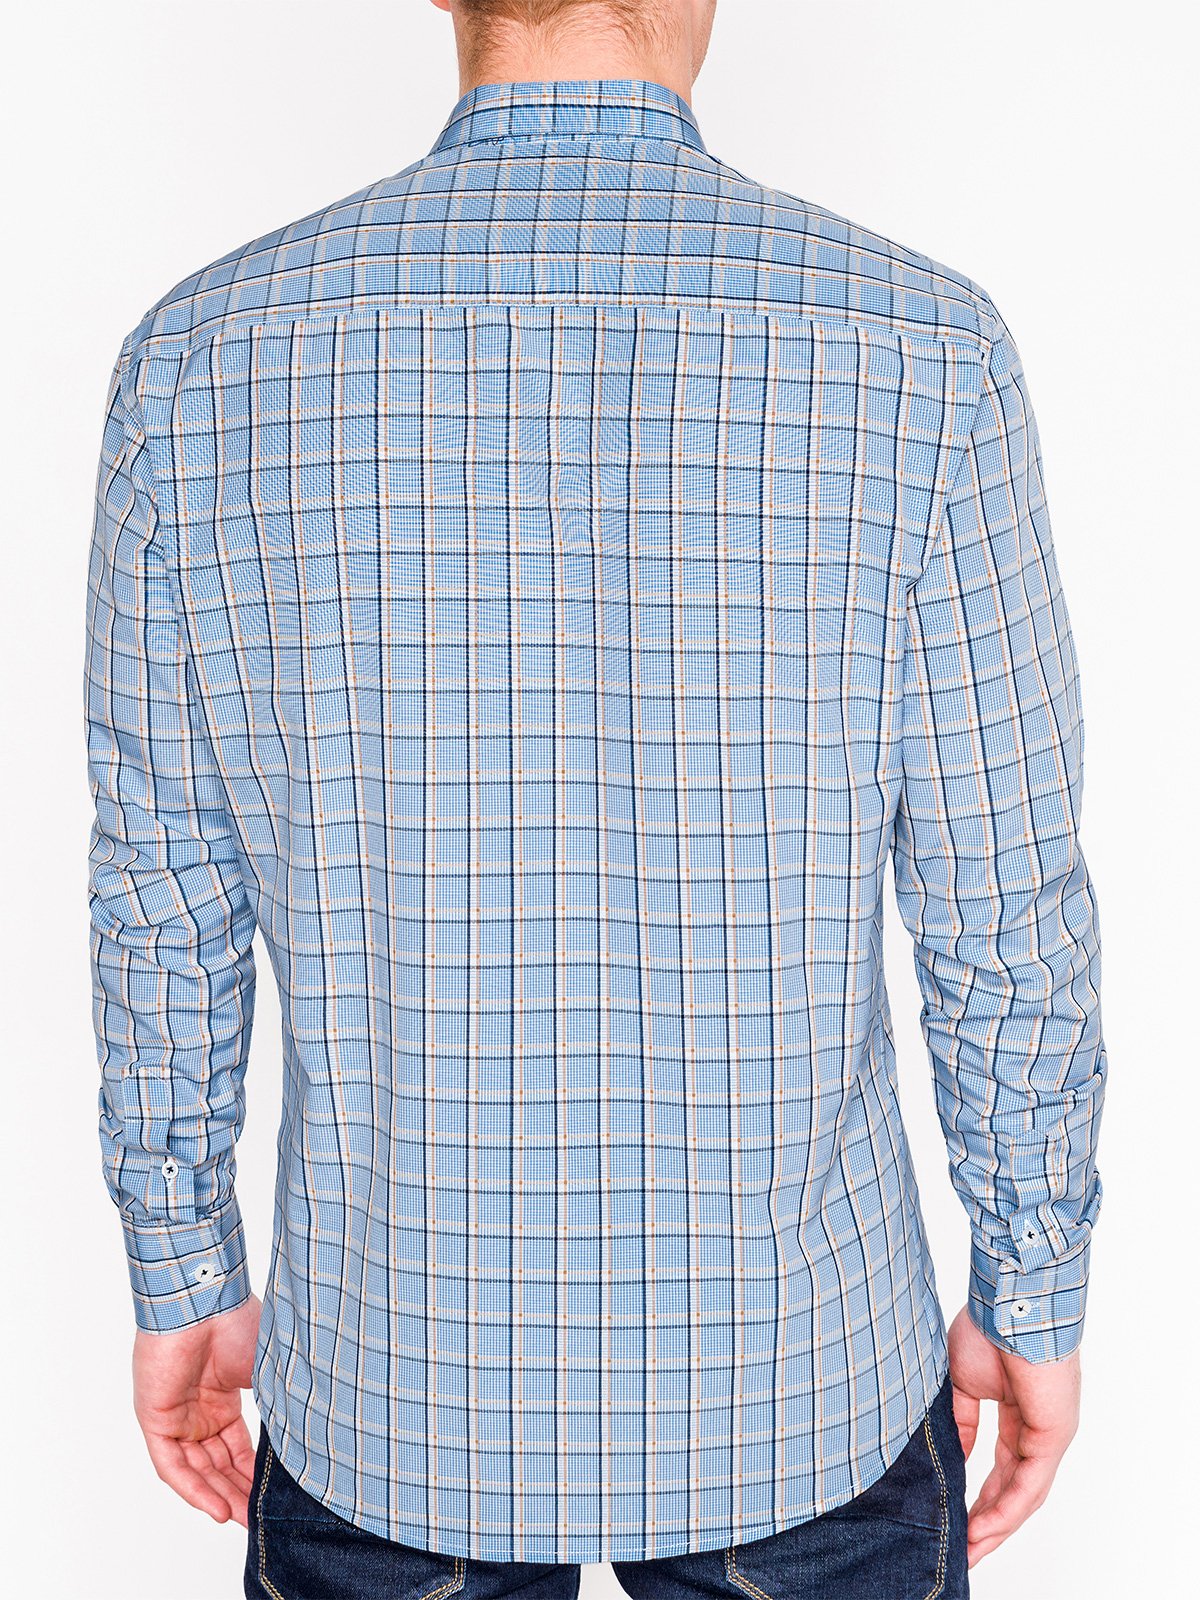 Men's check shirt with long sleeves K447 - light blue | MODONE ...